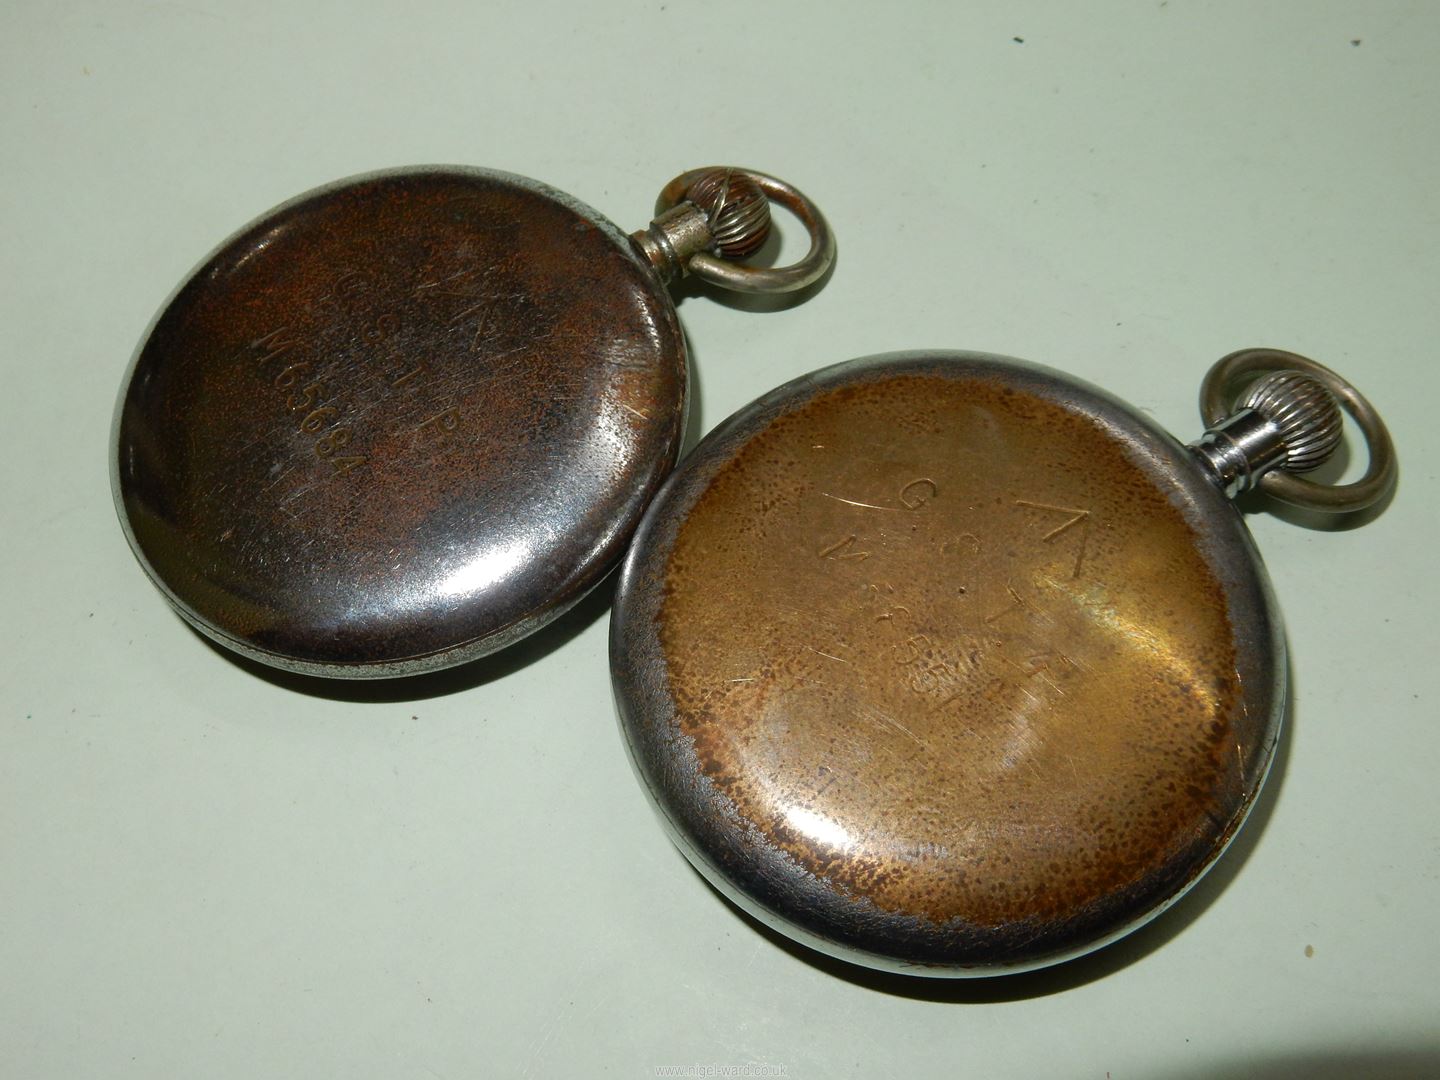 Five crown wound Pocket Watches with inset second hands, - Image 12 of 12